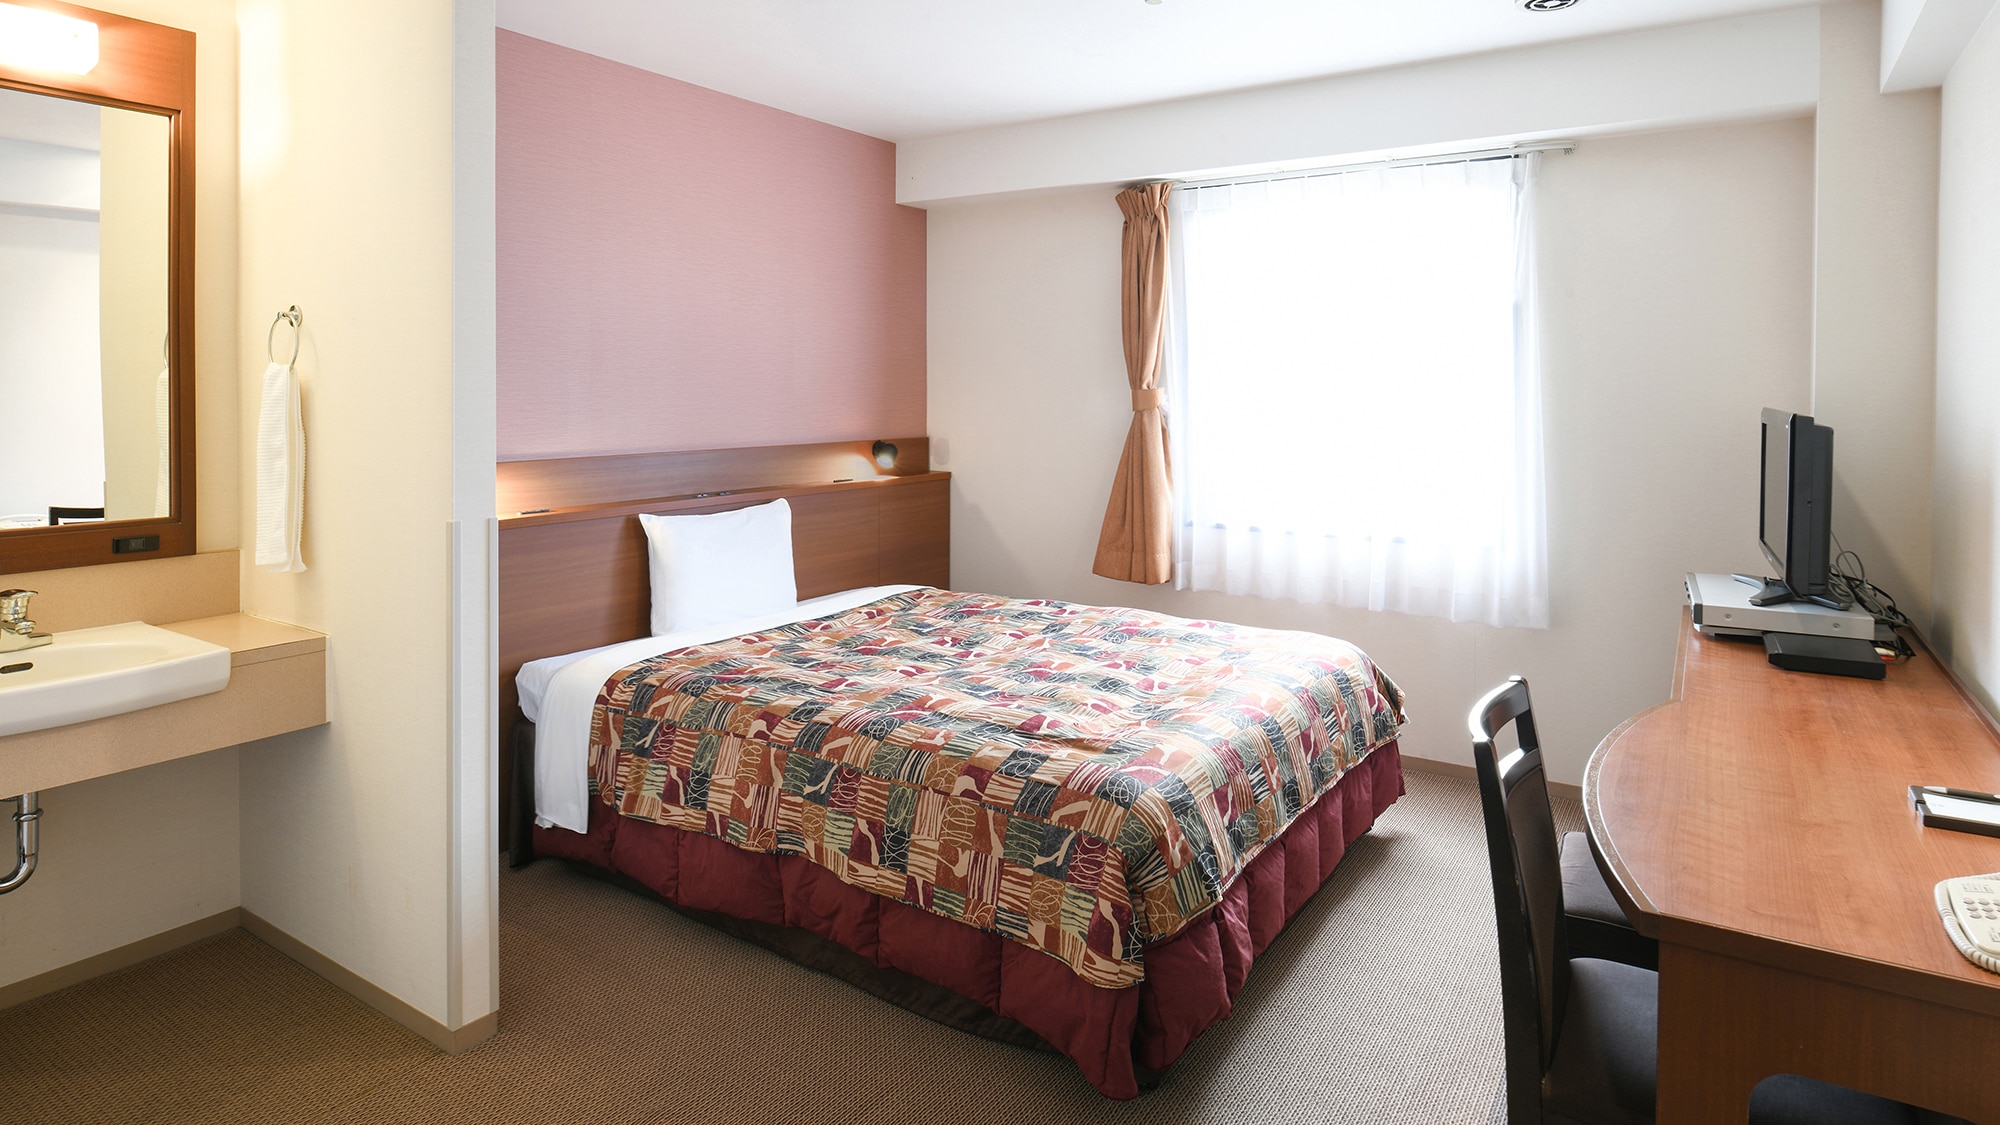 It is spacious with 21 square meters and is recommended for long-term stays.